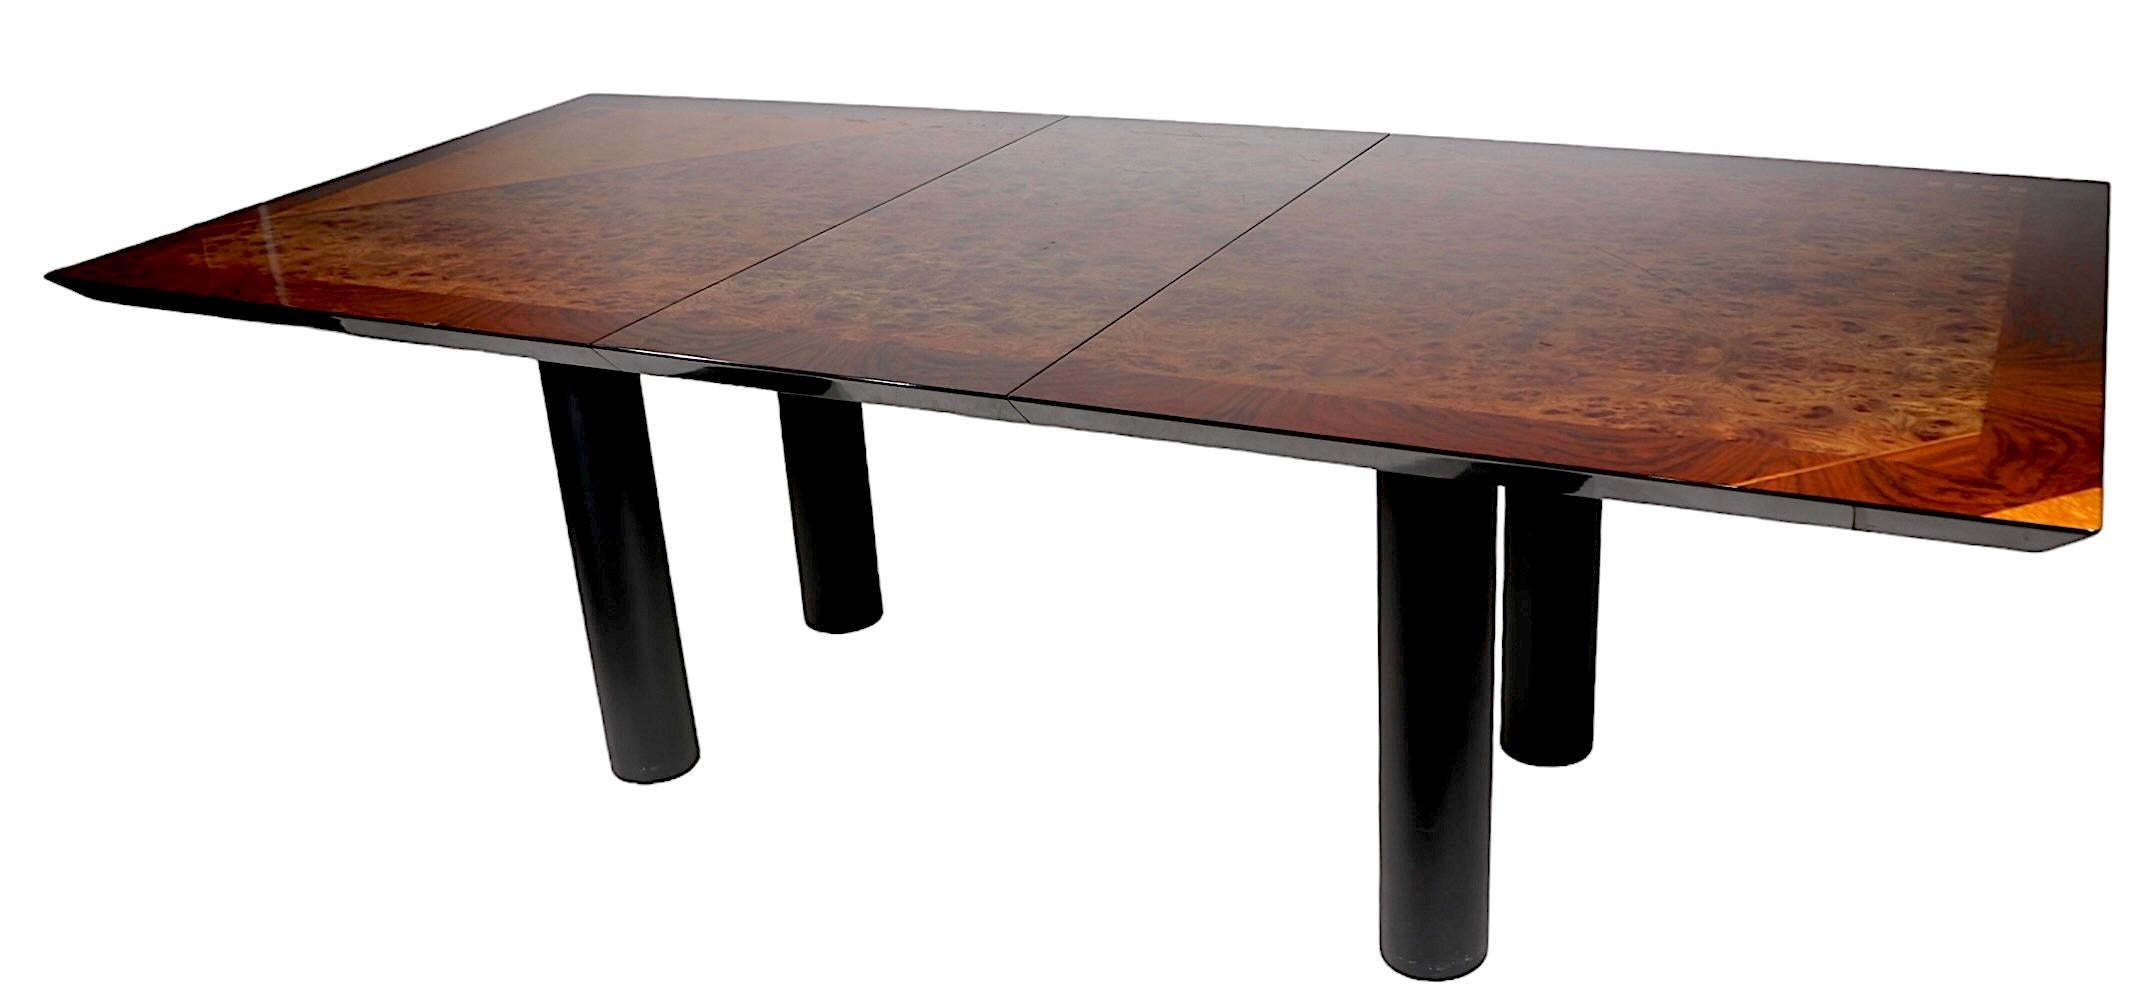 Italian Post Modern Dining Table by Oscar Dell Arredamento for Miniforms c 1970s For Sale 10